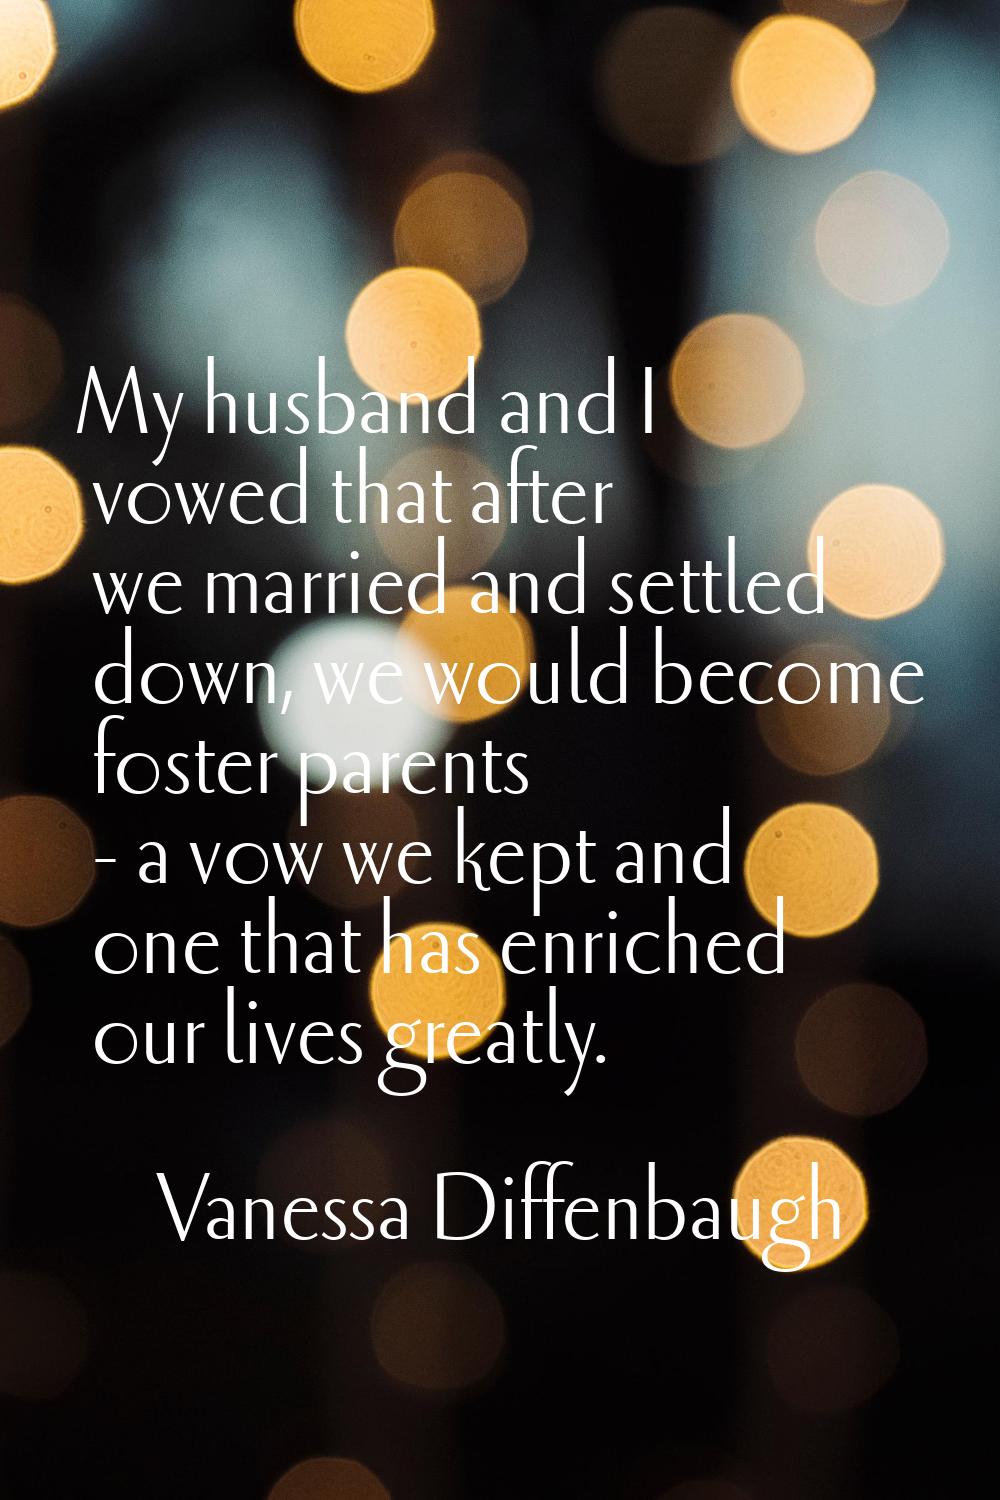 My husband and I vowed that after we married and settled down, we would become foster parents - a v